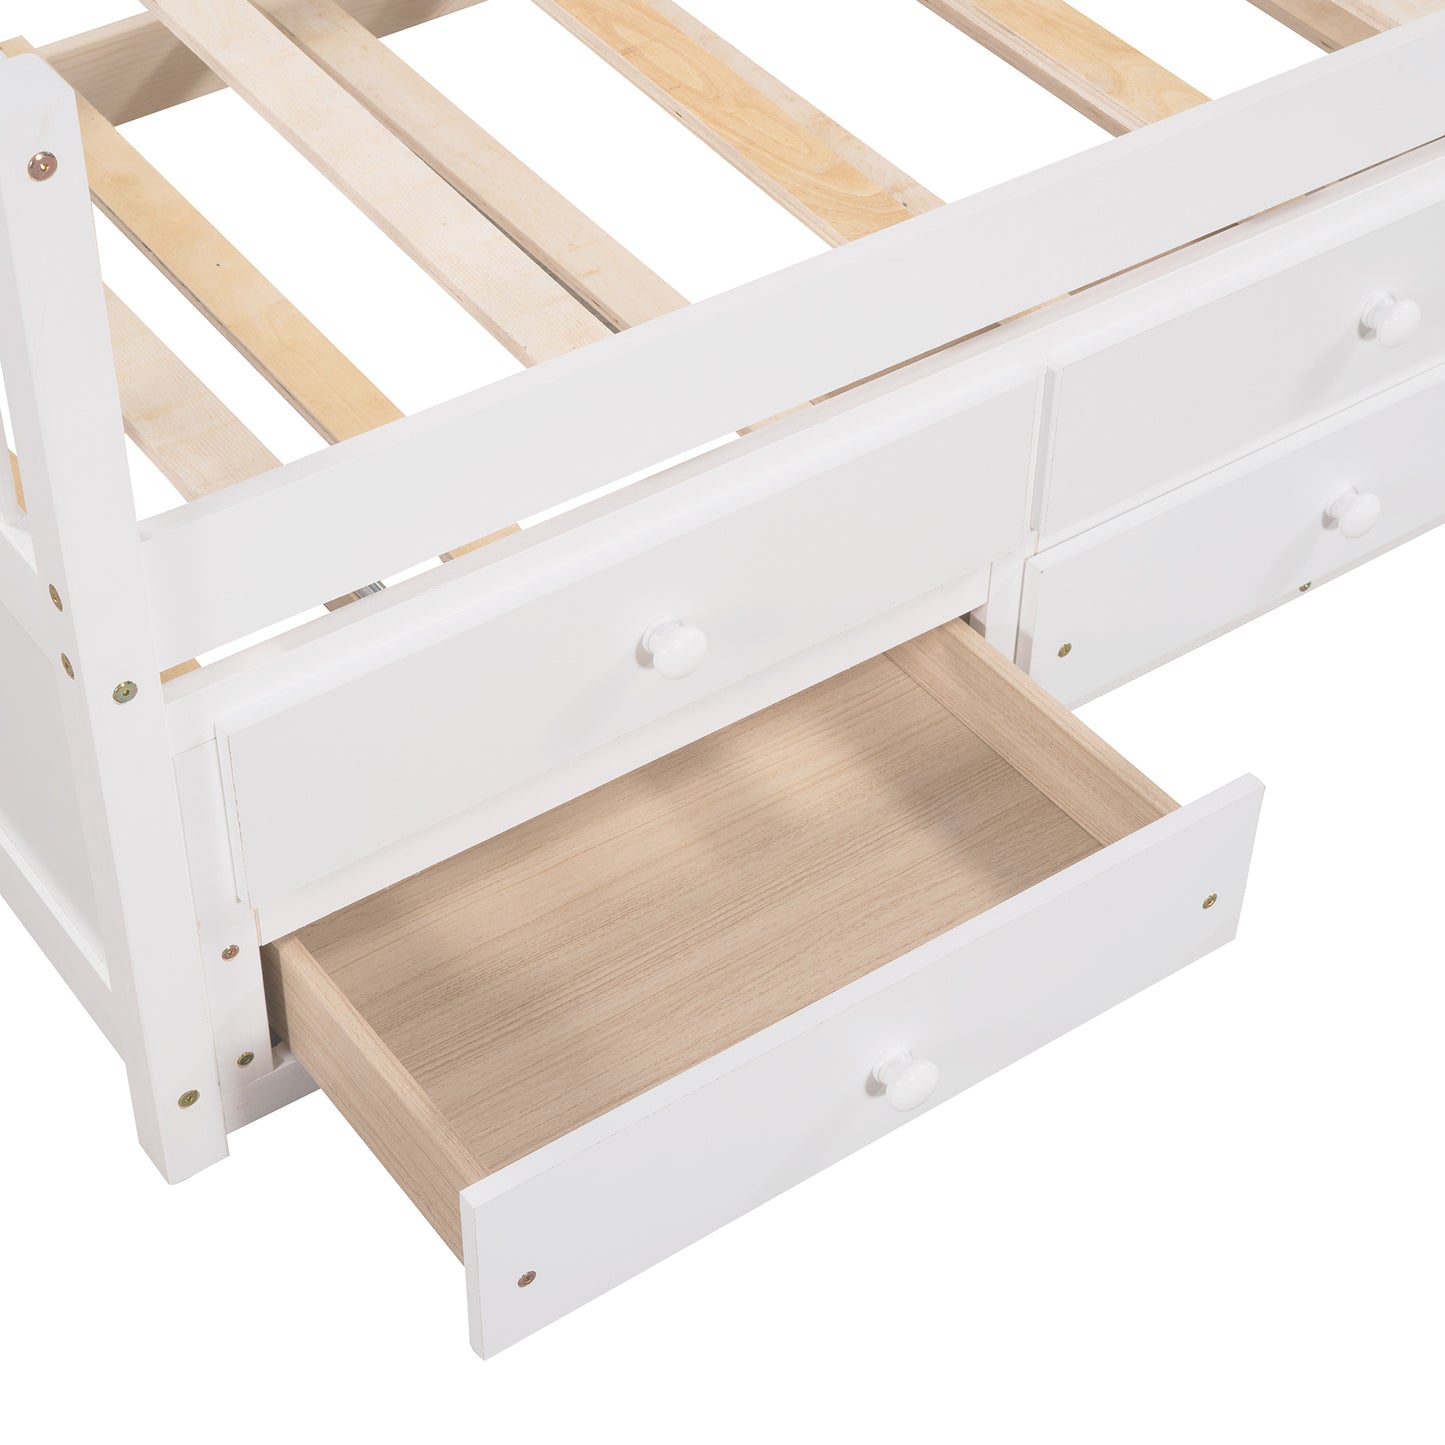 Daybed with Trundle and Drawers, Twin Size, White